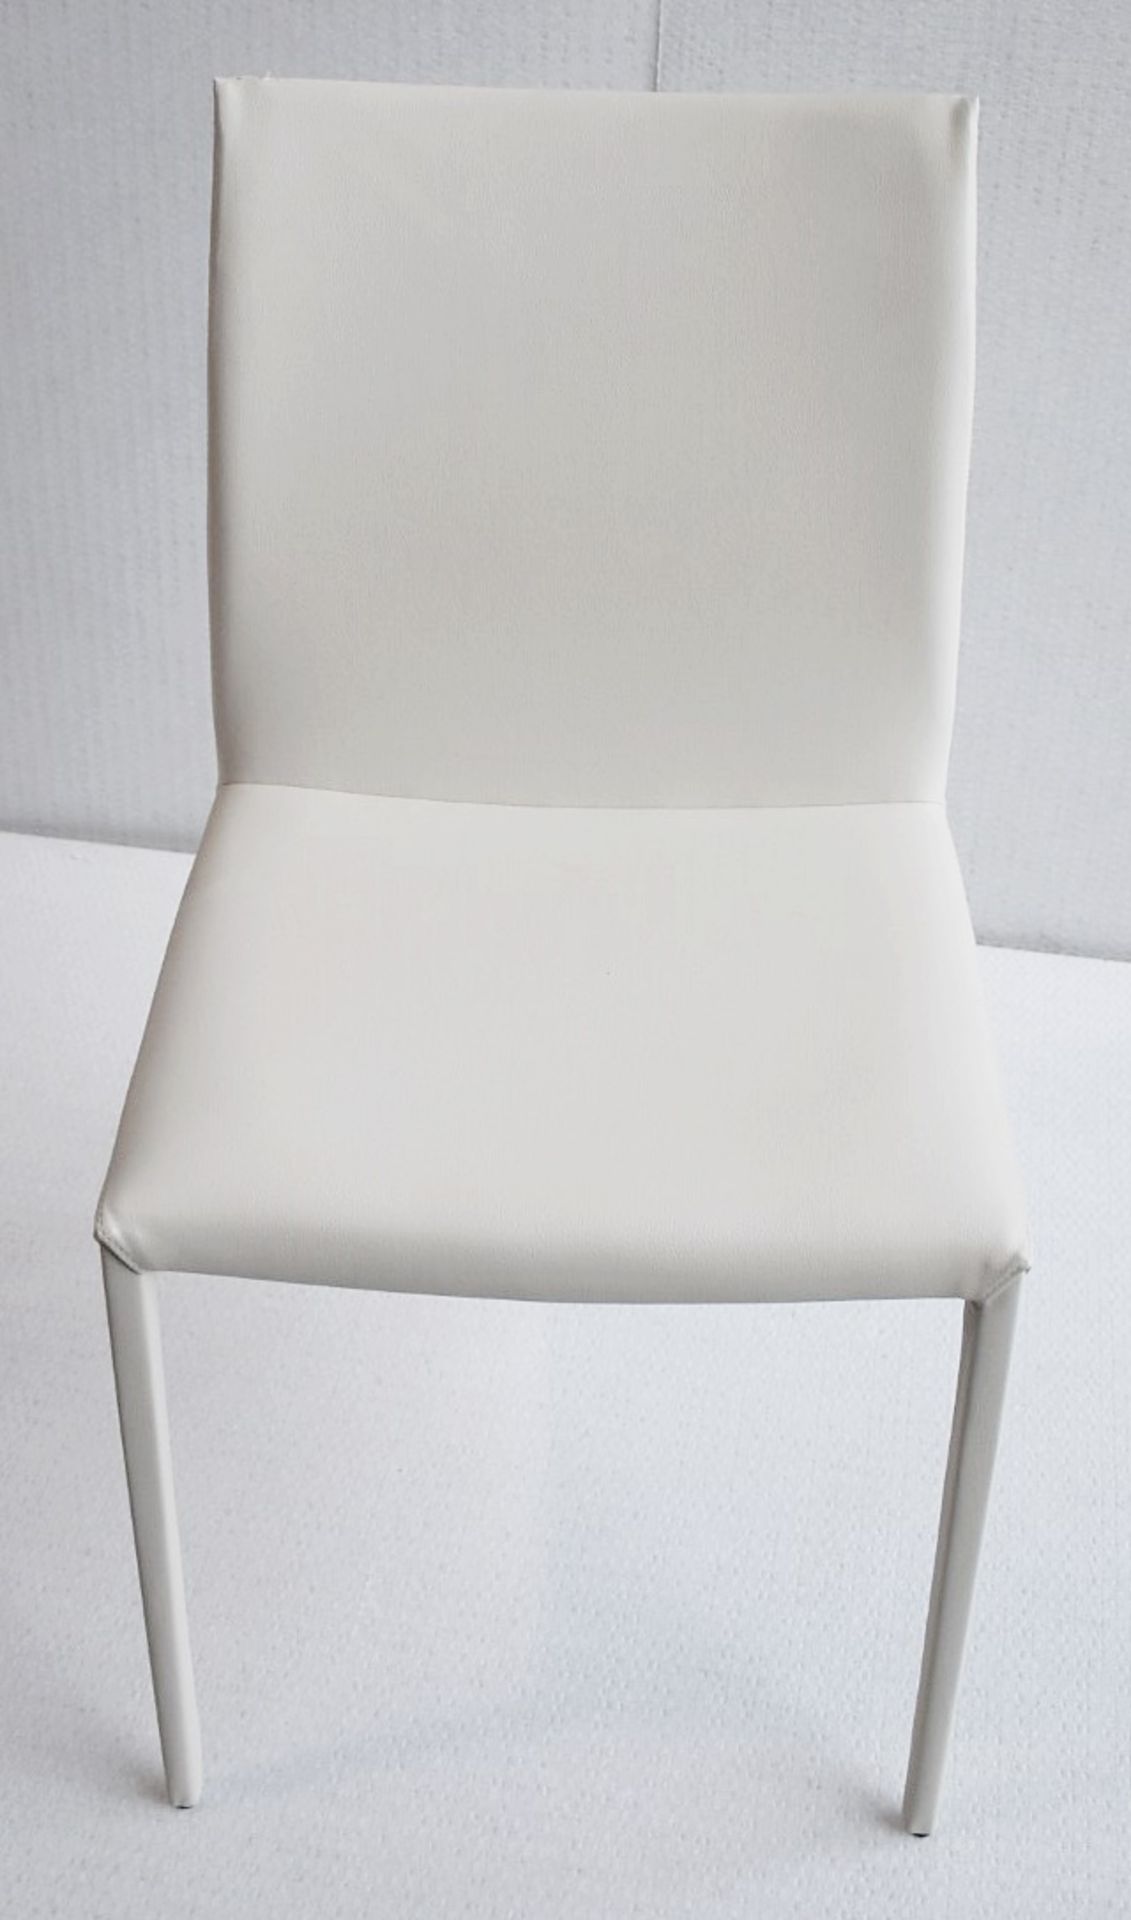 1 x CATTELAN ITALIA 'Norma' Designer Fully Upholstered Chair in a Pale Premium Leather - Image 2 of 9